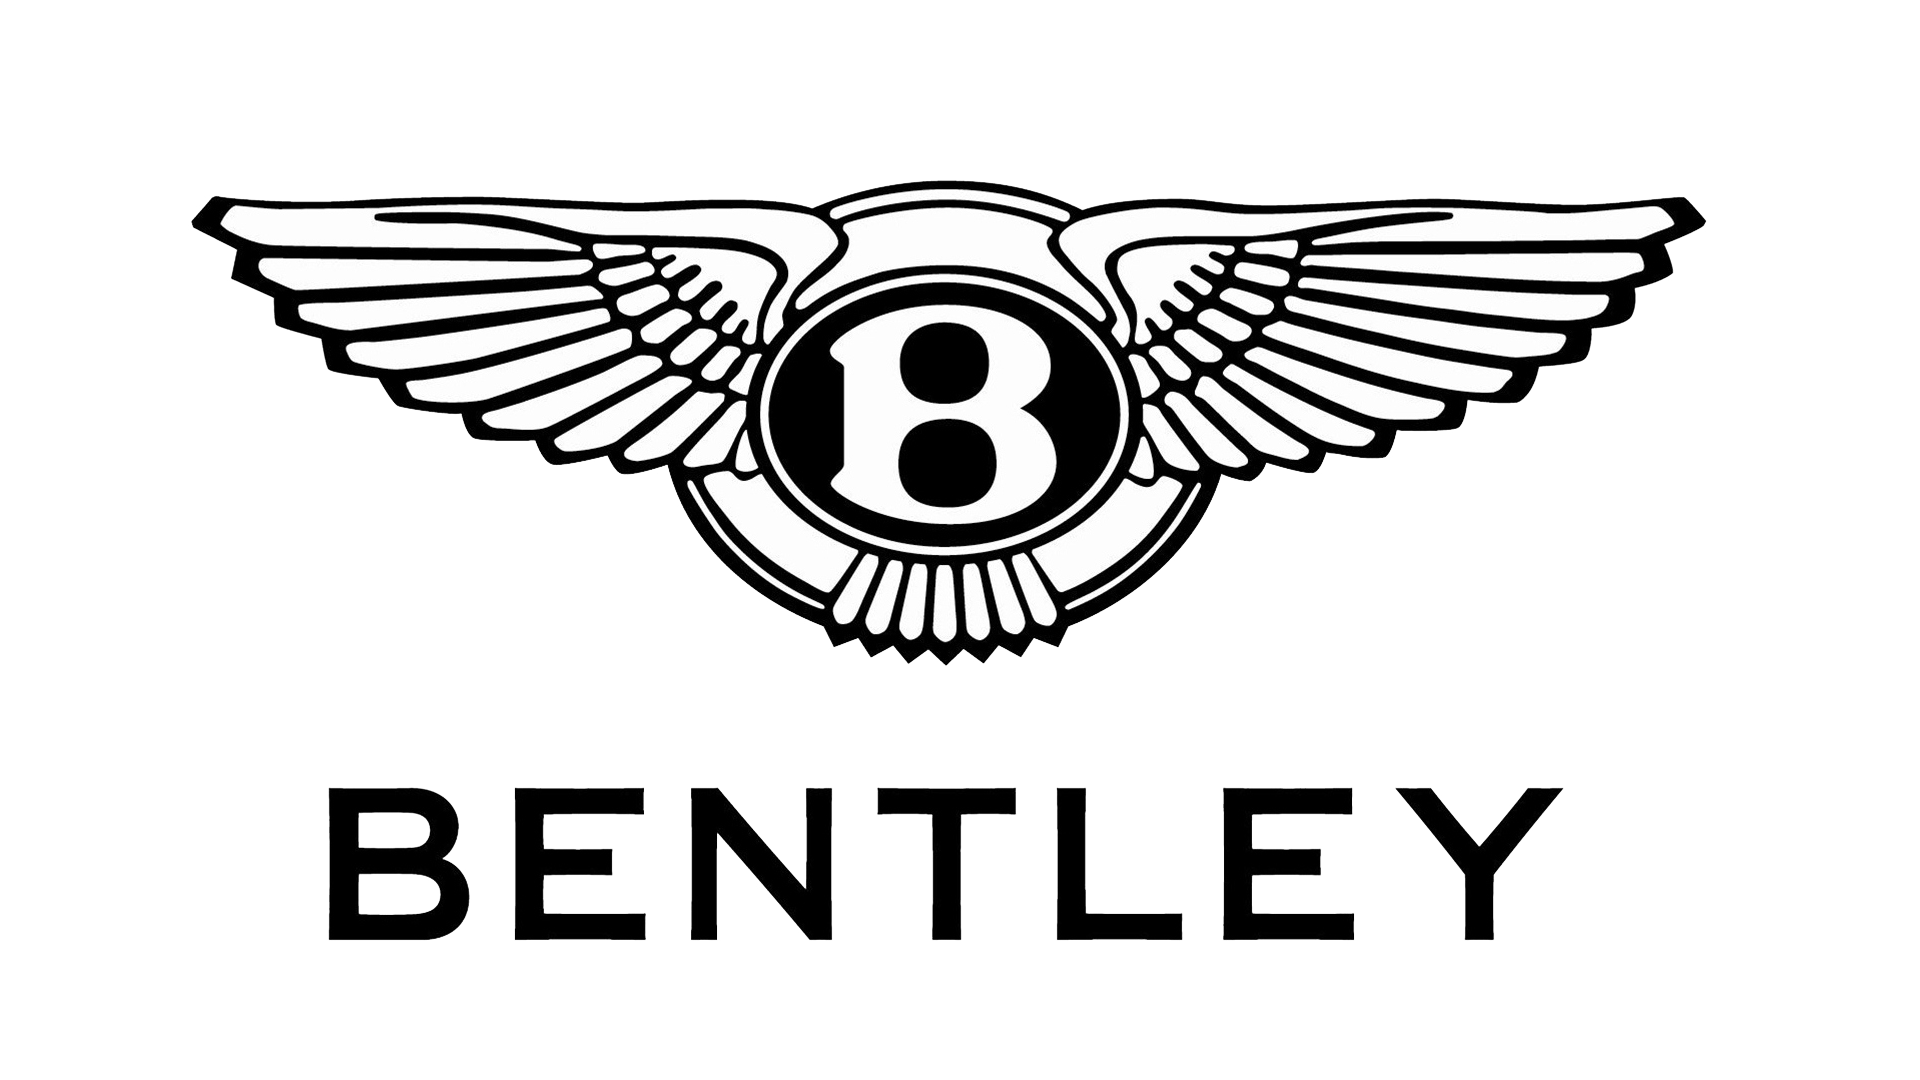 Bentley Logo, Hd Png, Meaning, Information, Bentley Logo PNG - Free PNG